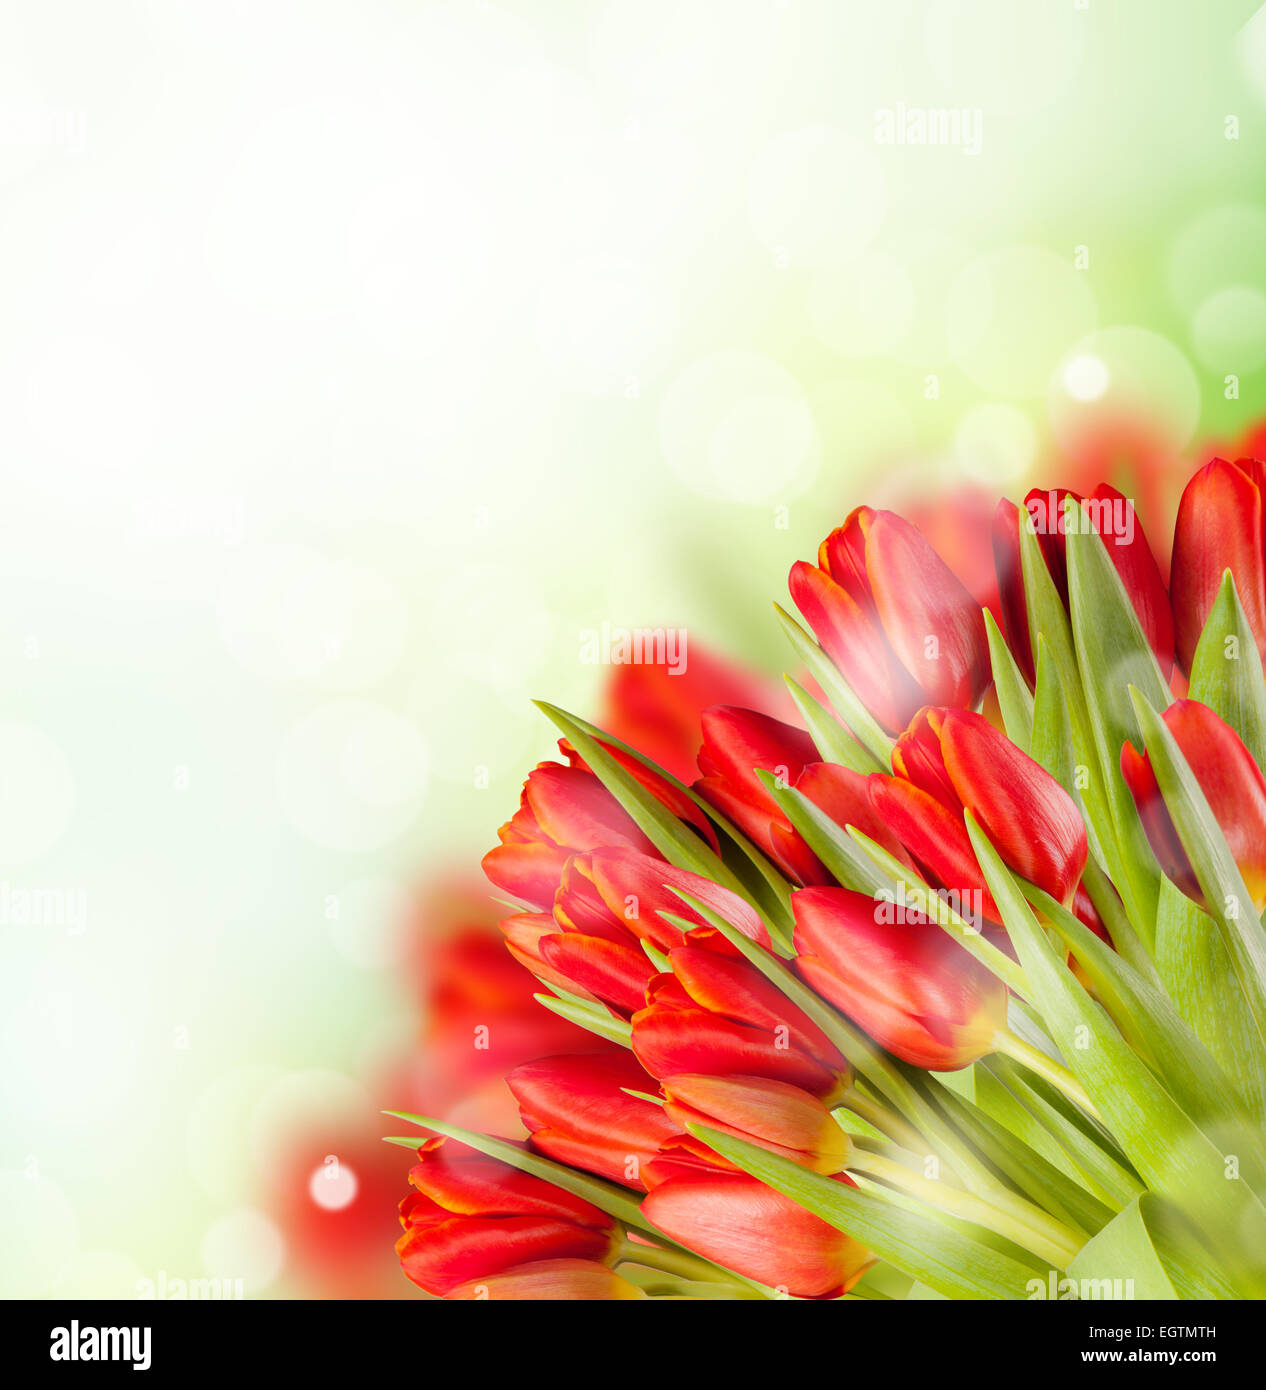 Boquet of red tulips with copyspace for text Stock Photo